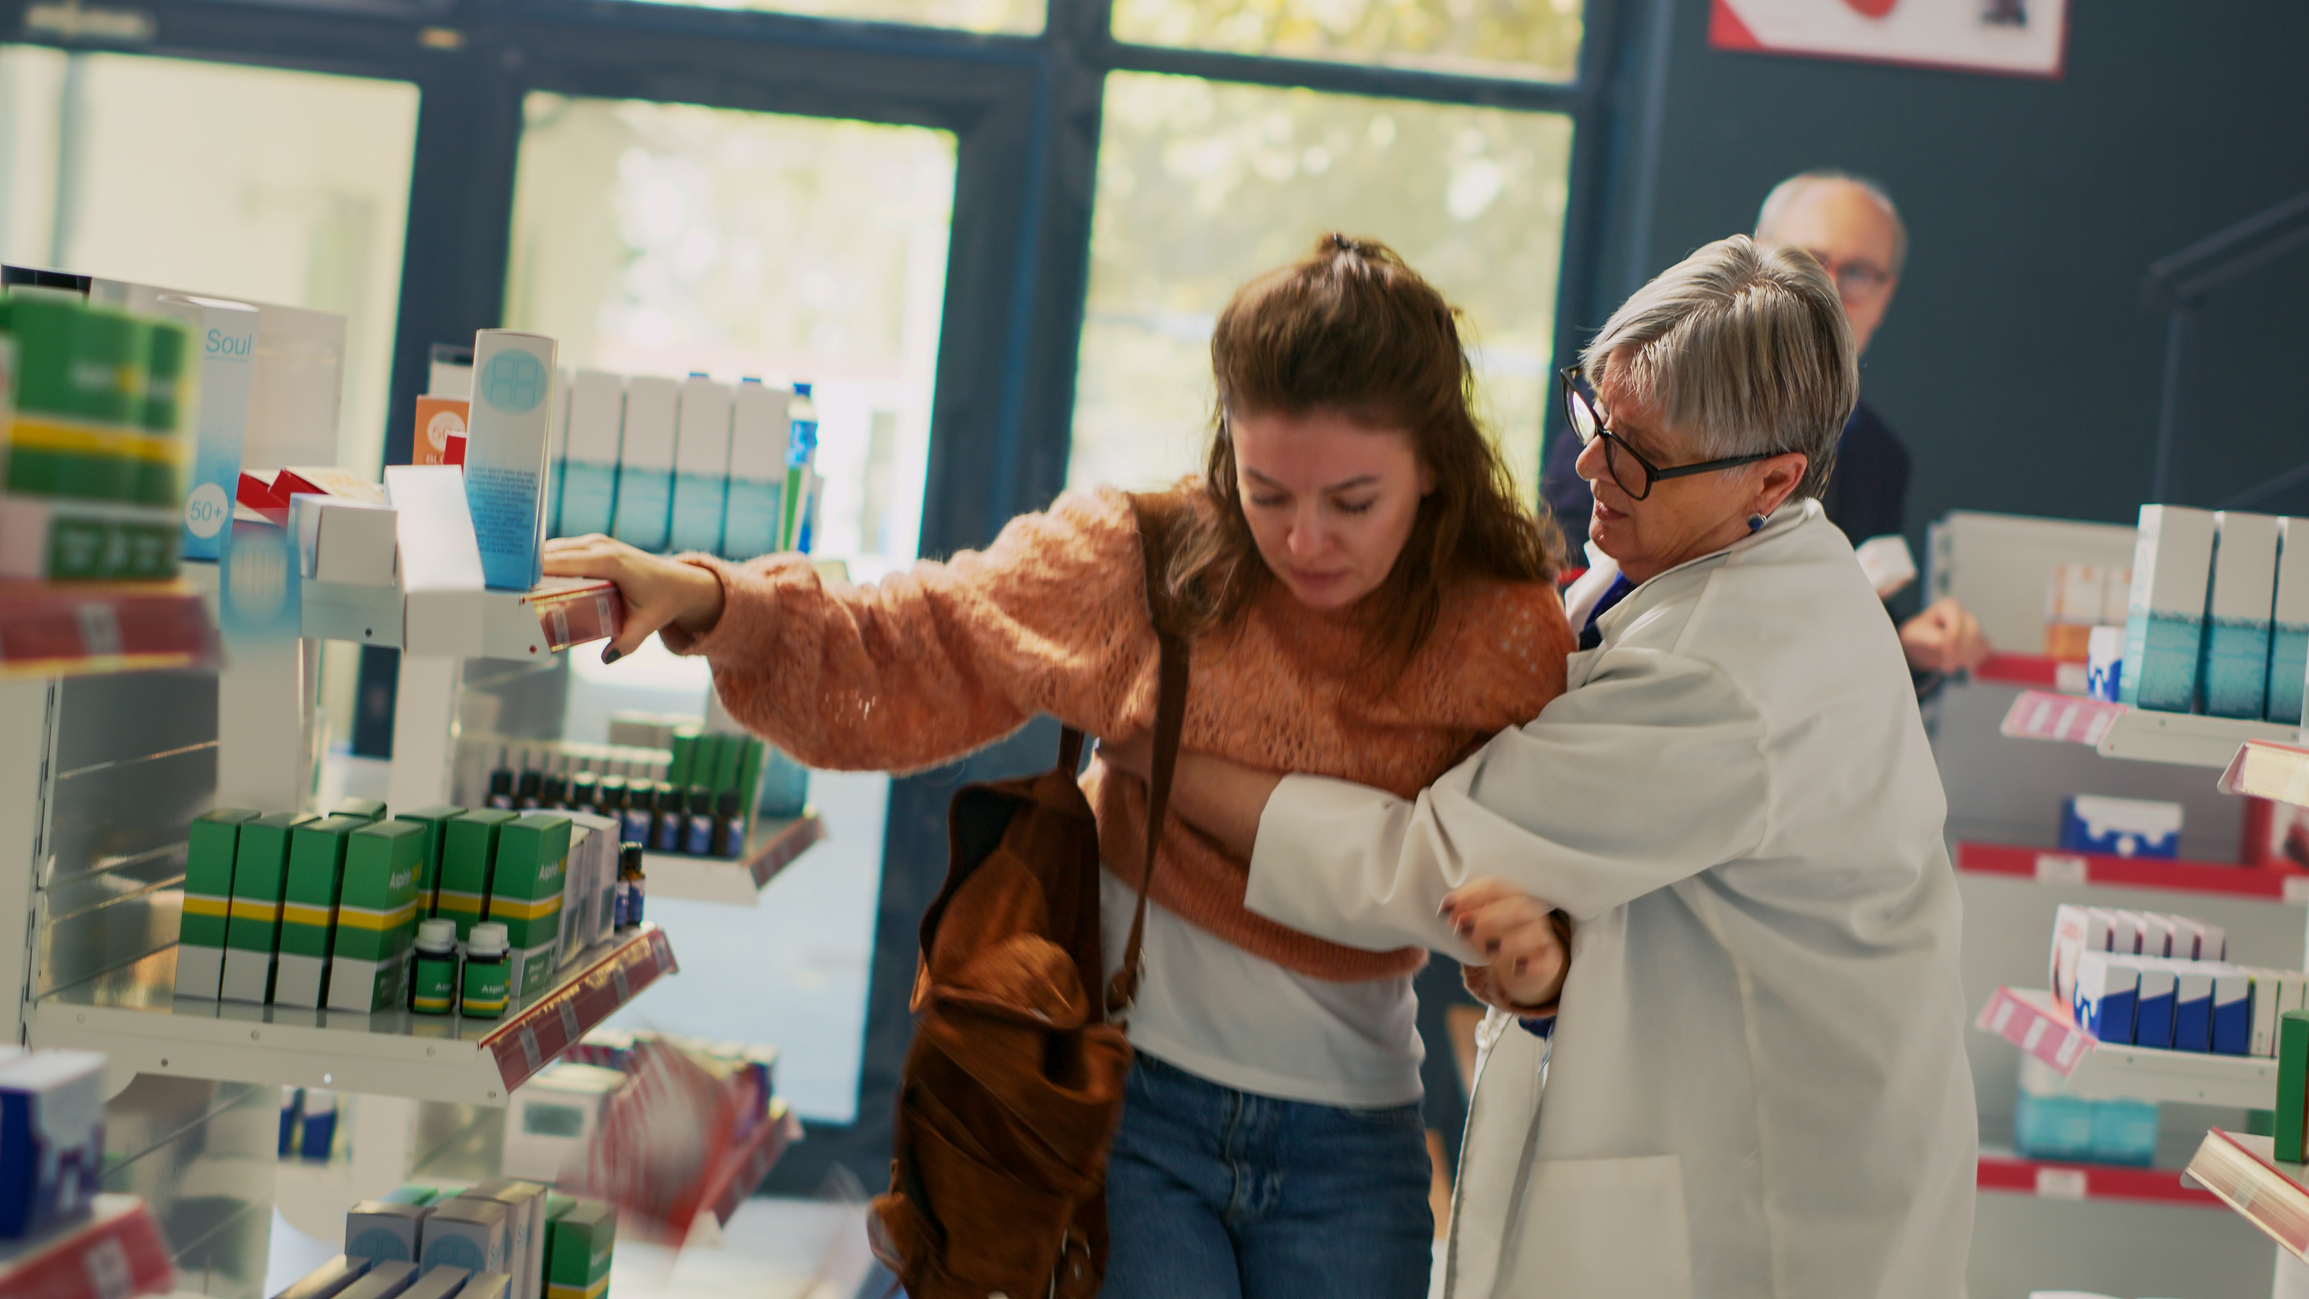 A concerned female pharmacist with short white hair recognizes early stroke symptoms when she holds a young woman in an orange sweater to keep her from falling